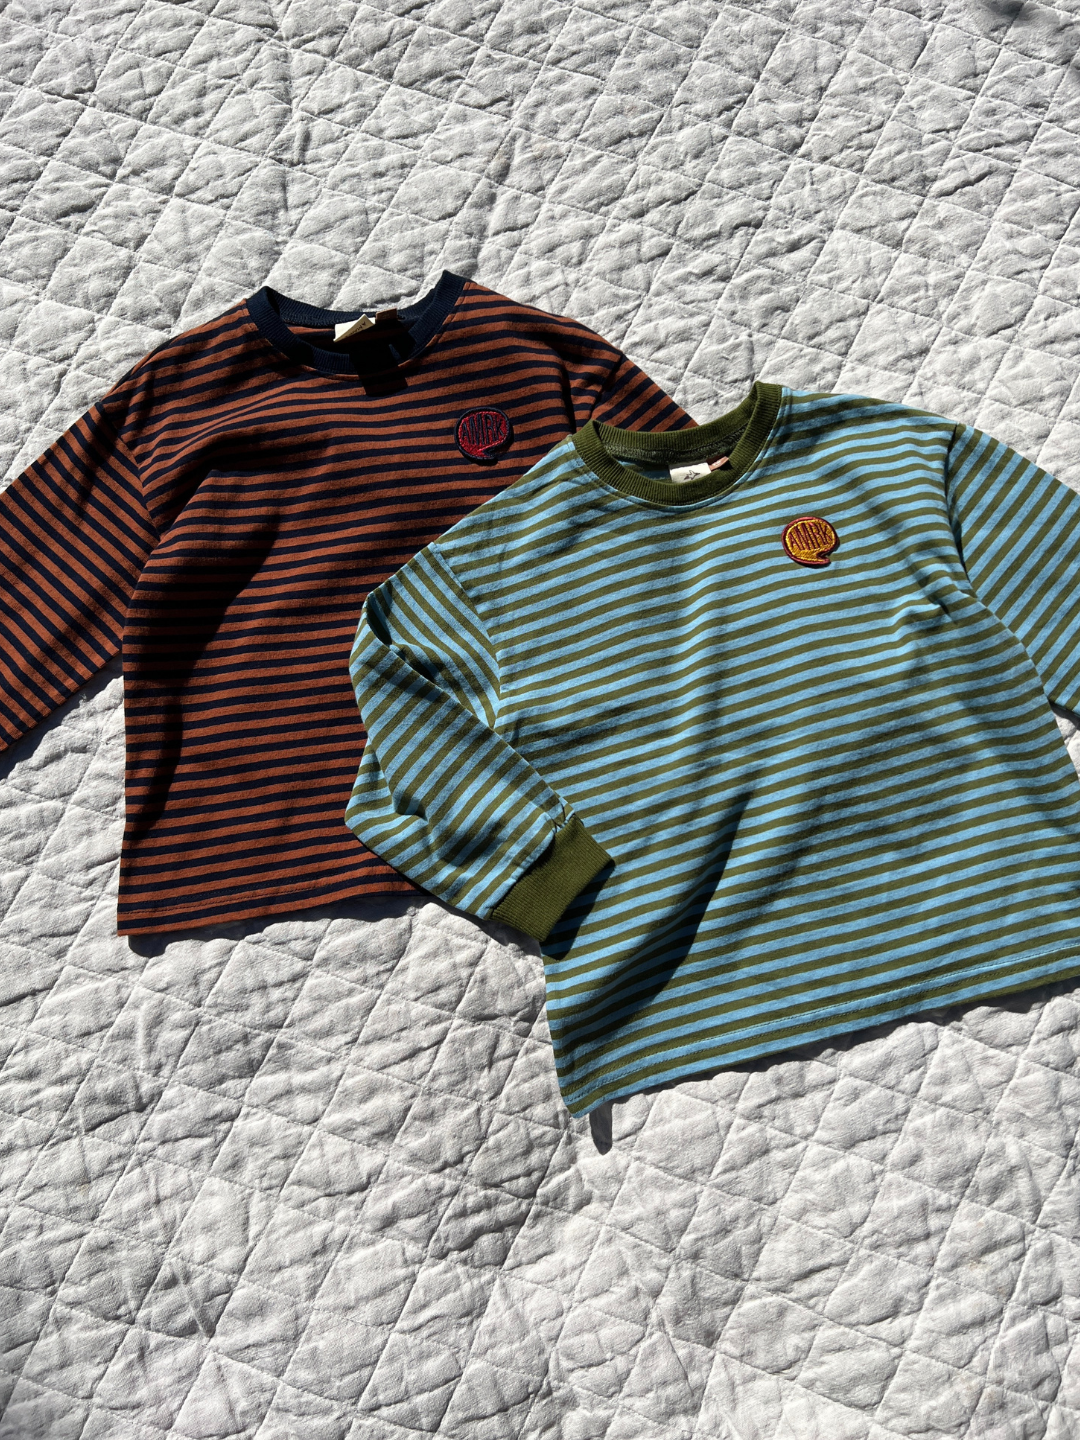 Comma Striped Longsleeve in Sky/Olive and Rust/Navy laid on blankets